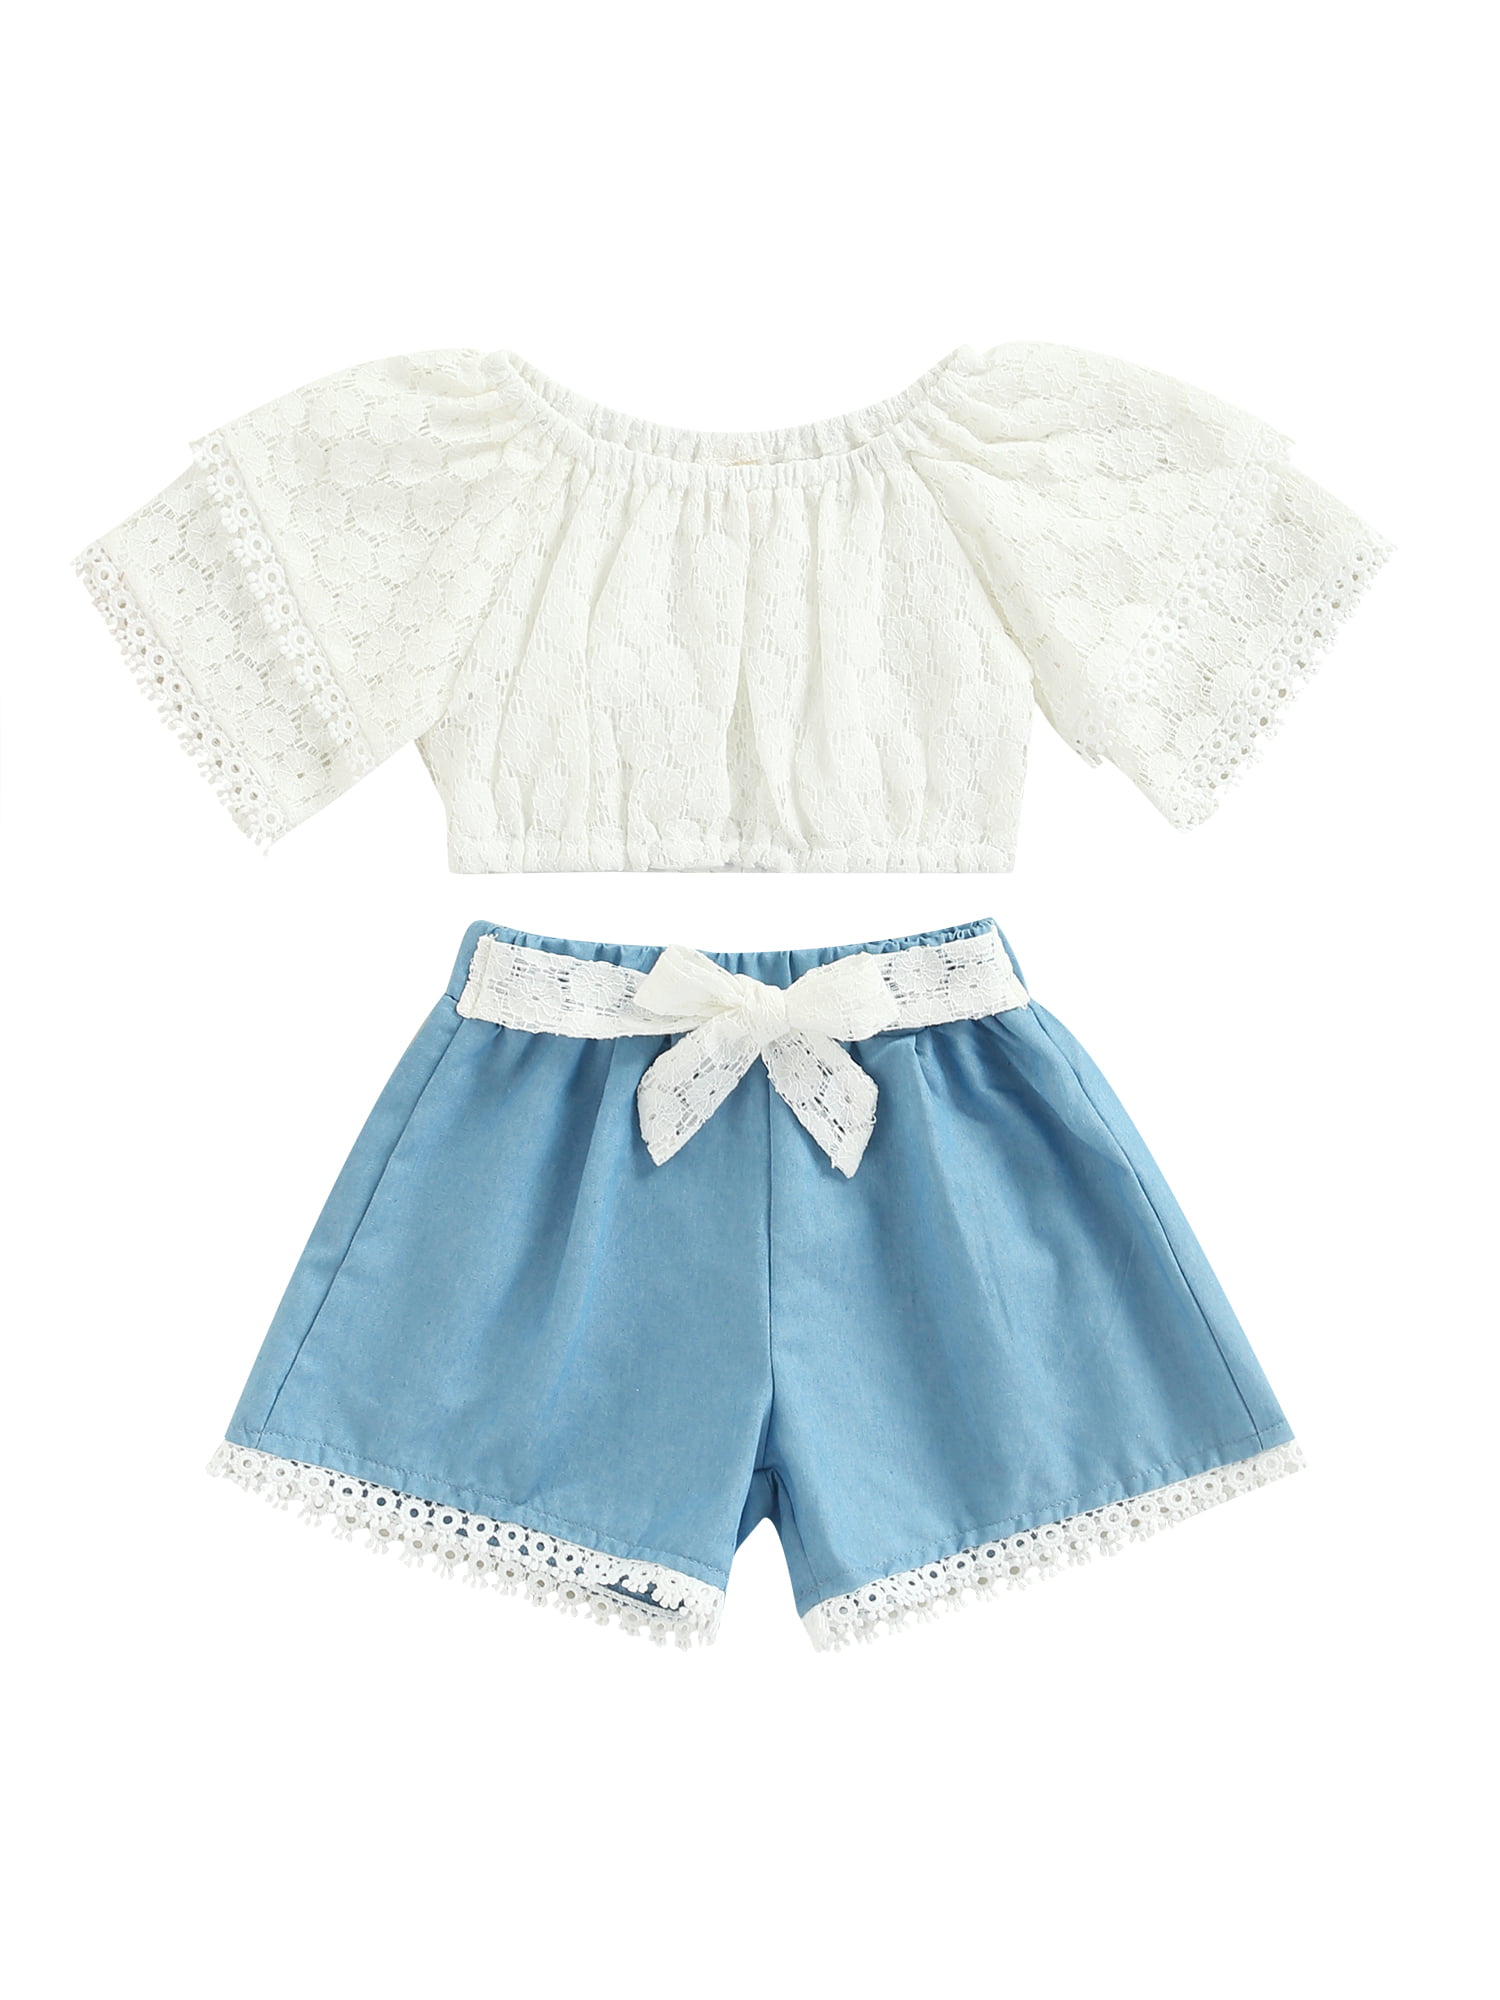 Details about   2Pcs Toddler Kids Baby Girls Outfit Gallus Tops Shorts Summer Clothes Set 